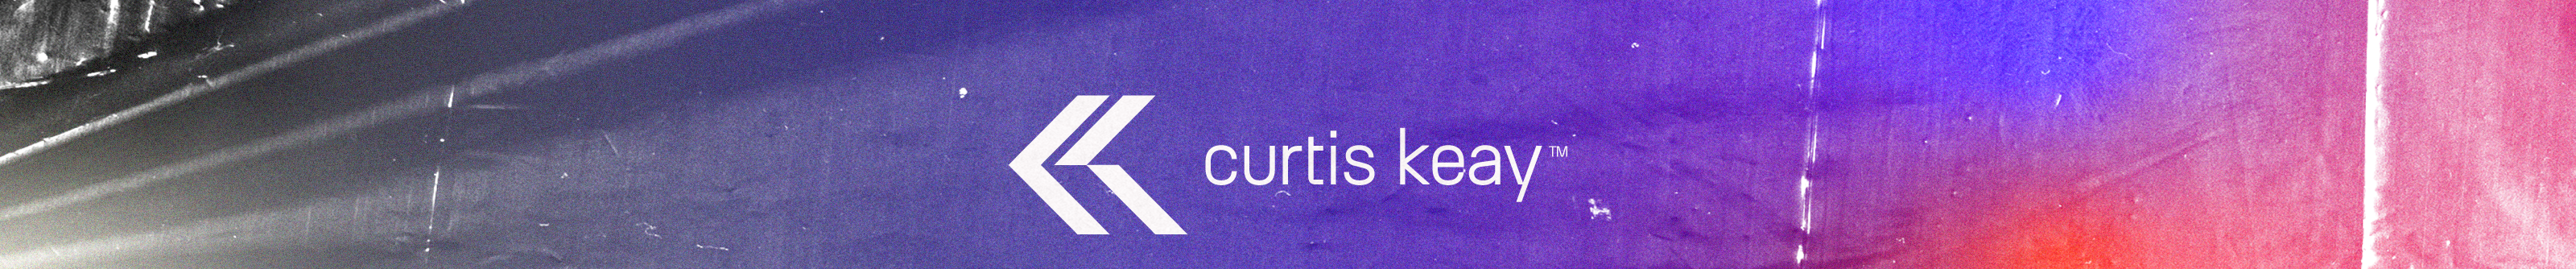 Curtis Keay's profile banner